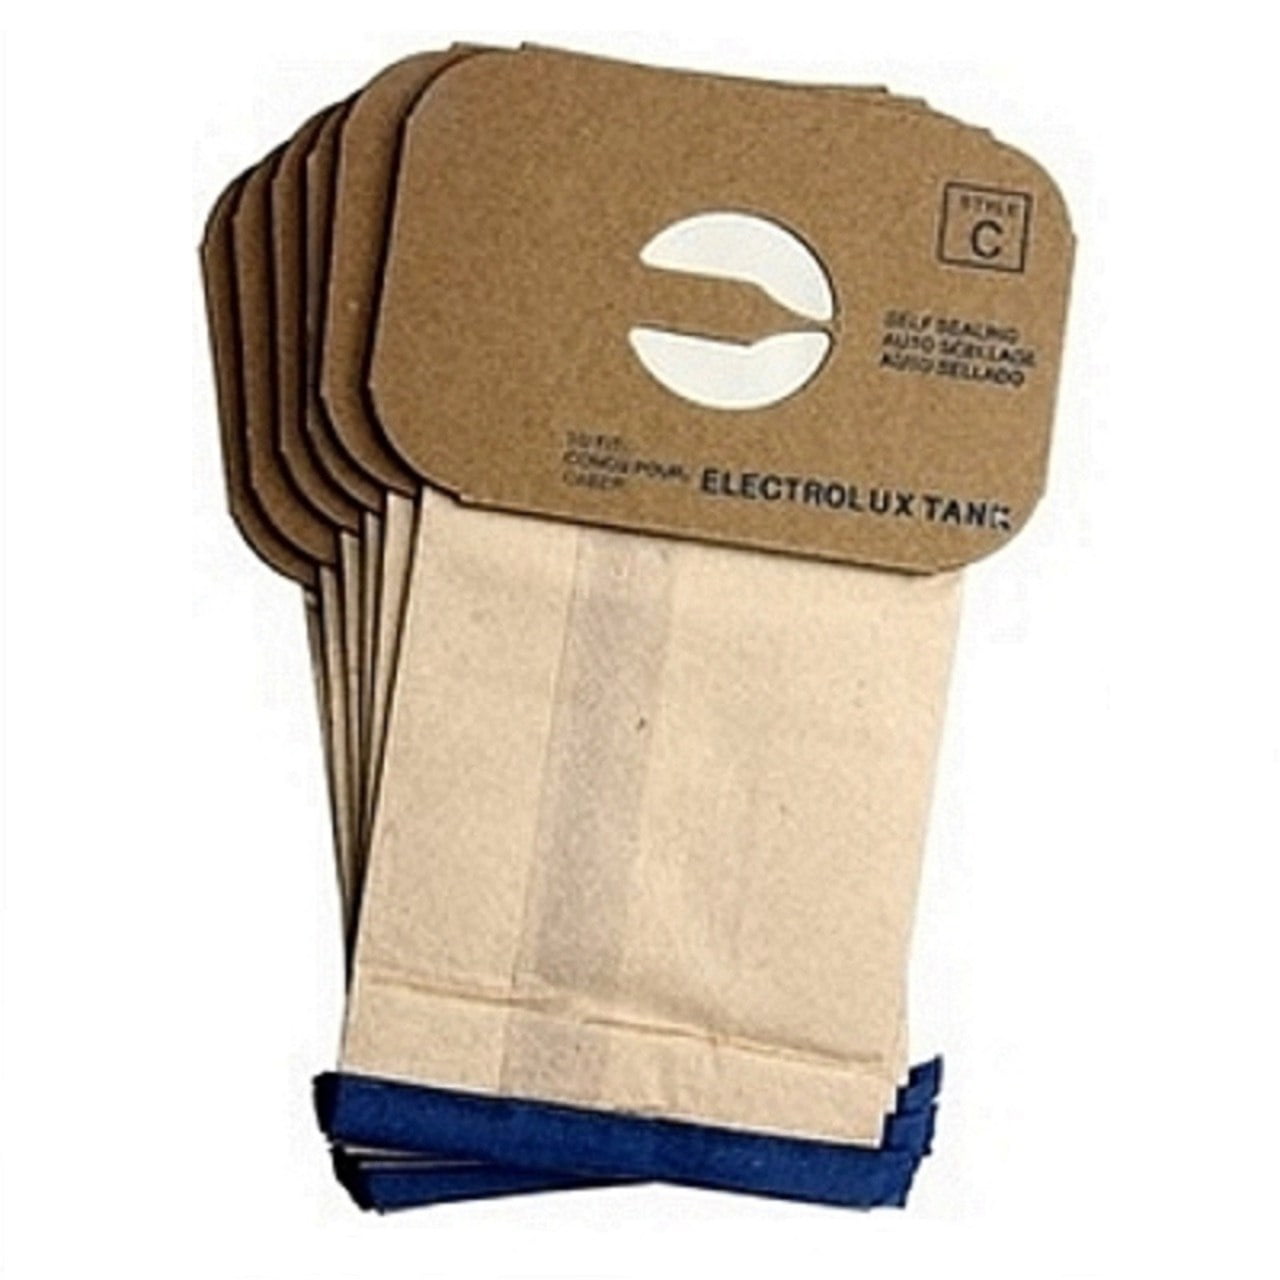 Electrolux Tank Canister Vacuum Cleaner Type C Paper Bags 100 PK Part # 805FPC for sale online